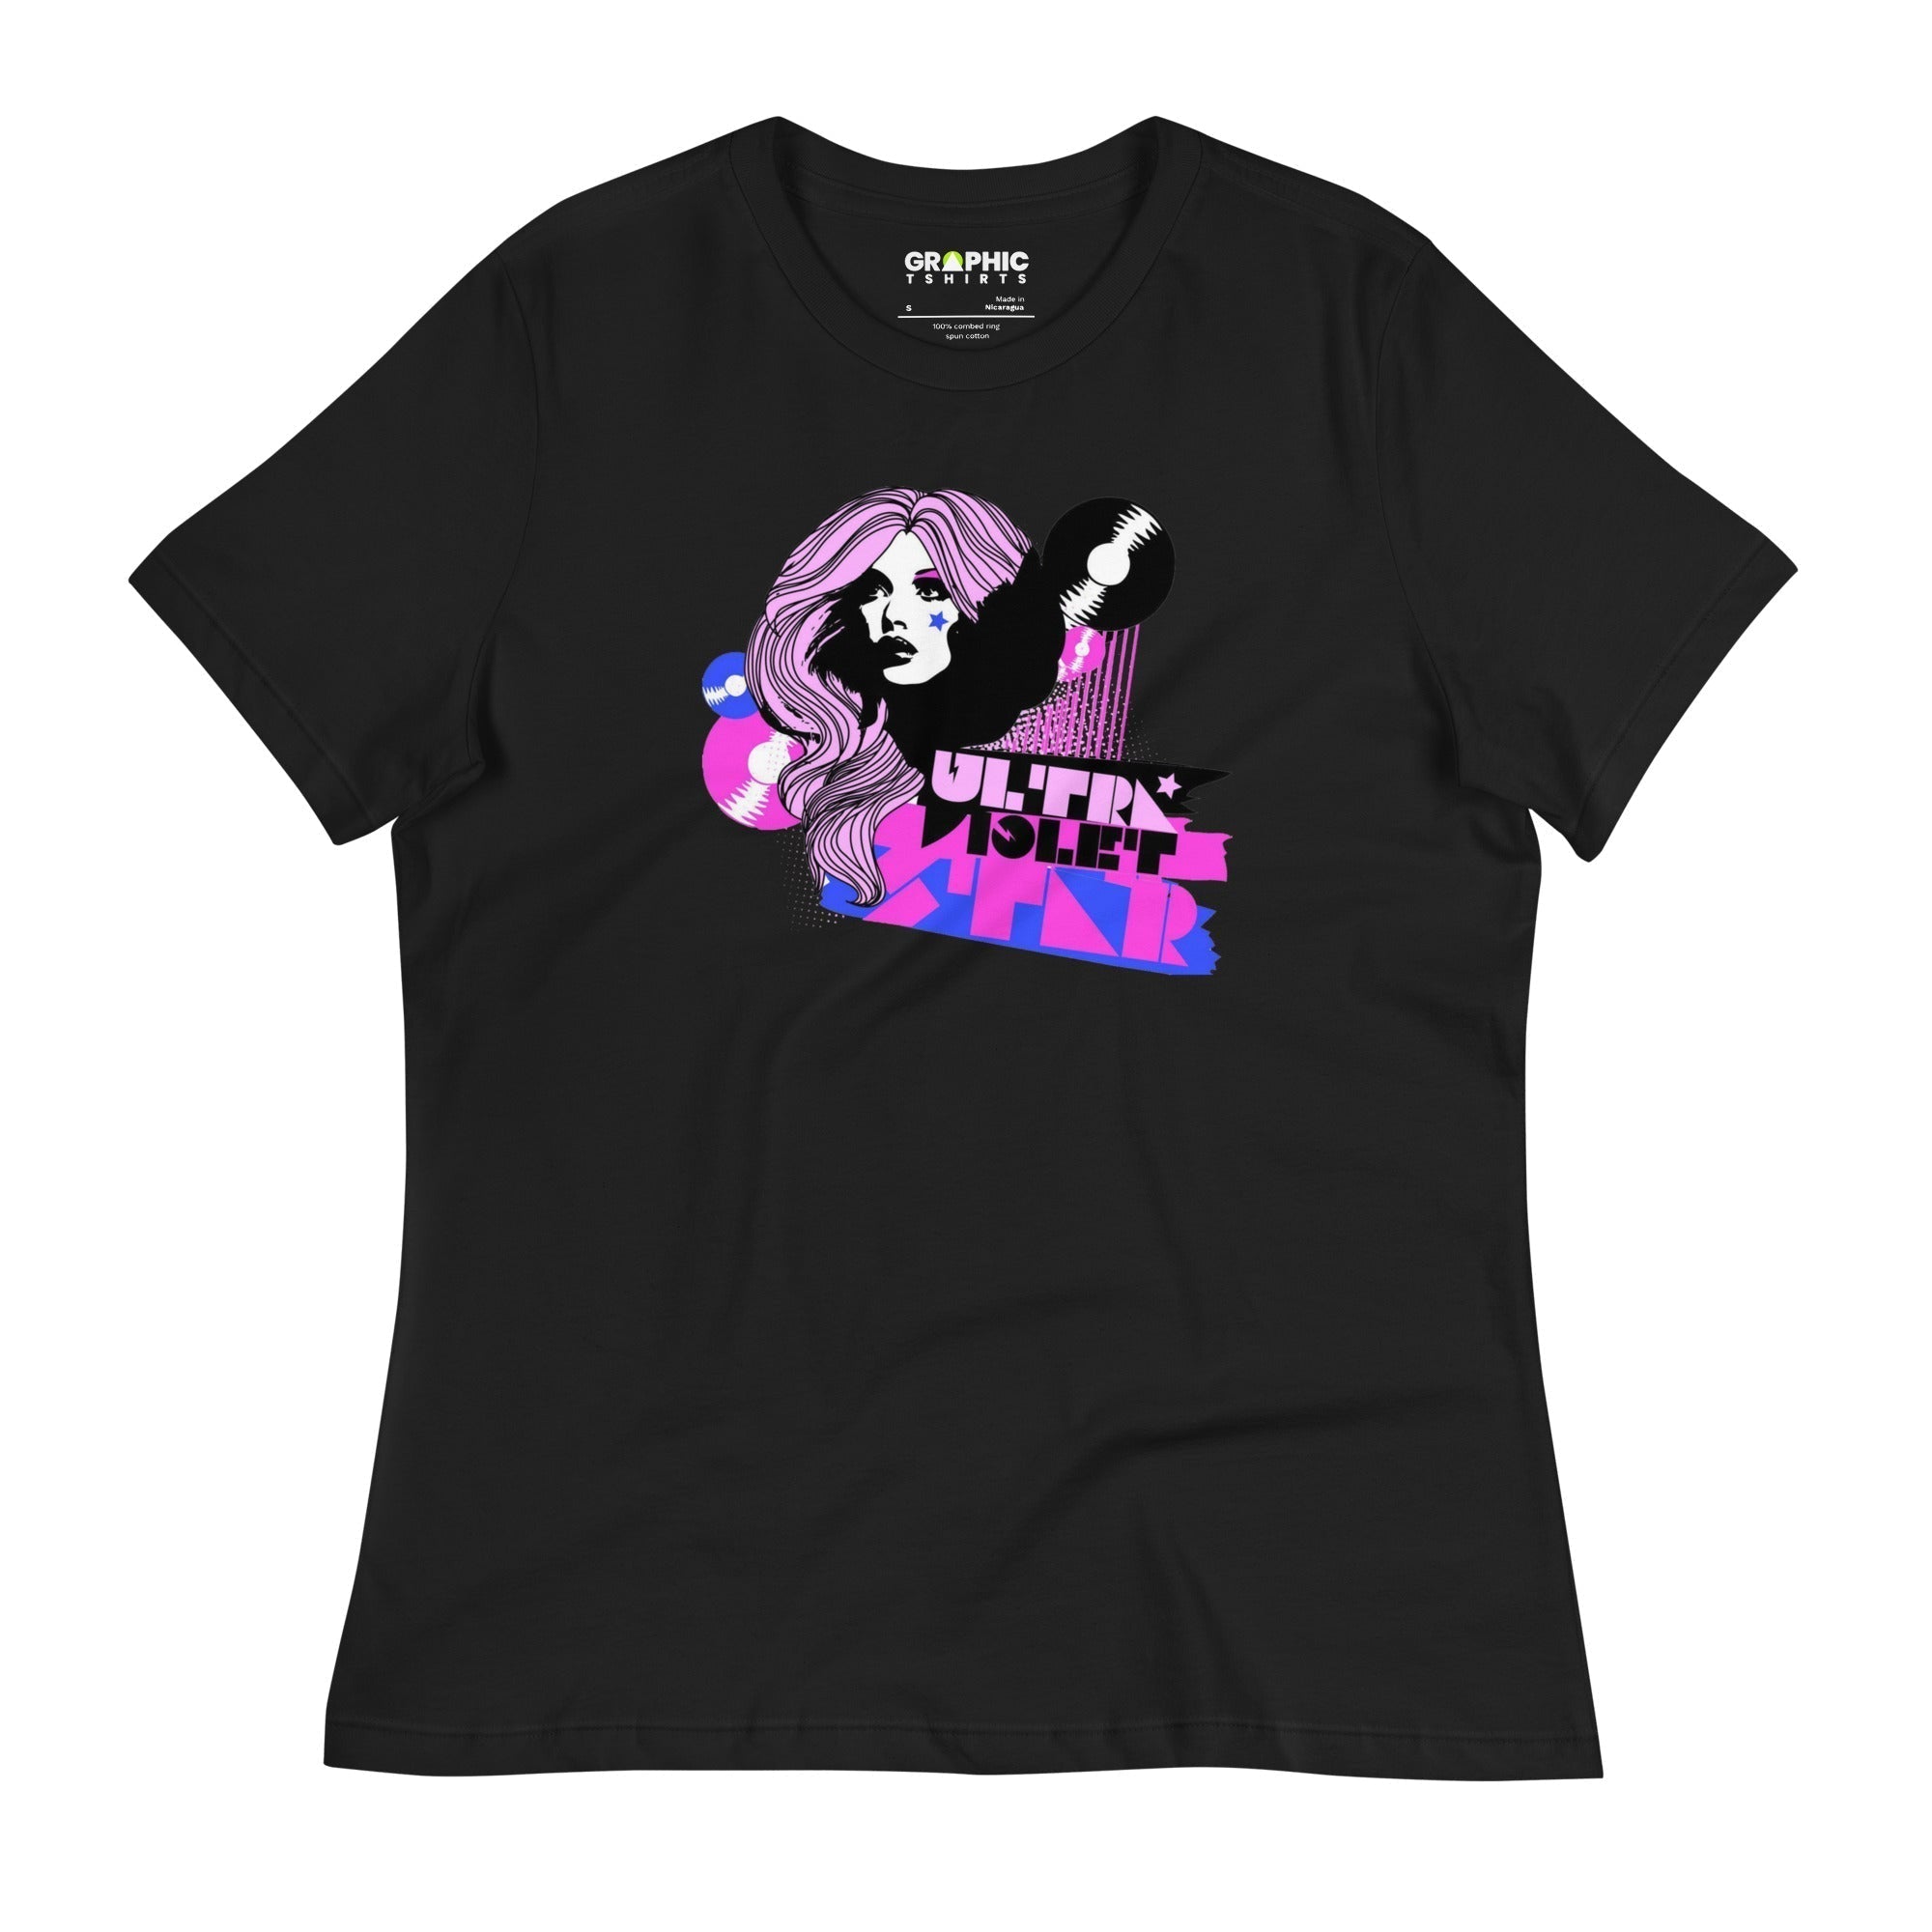 Women's Relaxed T-Shirt - Ultra Violet Star - GRAPHIC T-SHIRTS